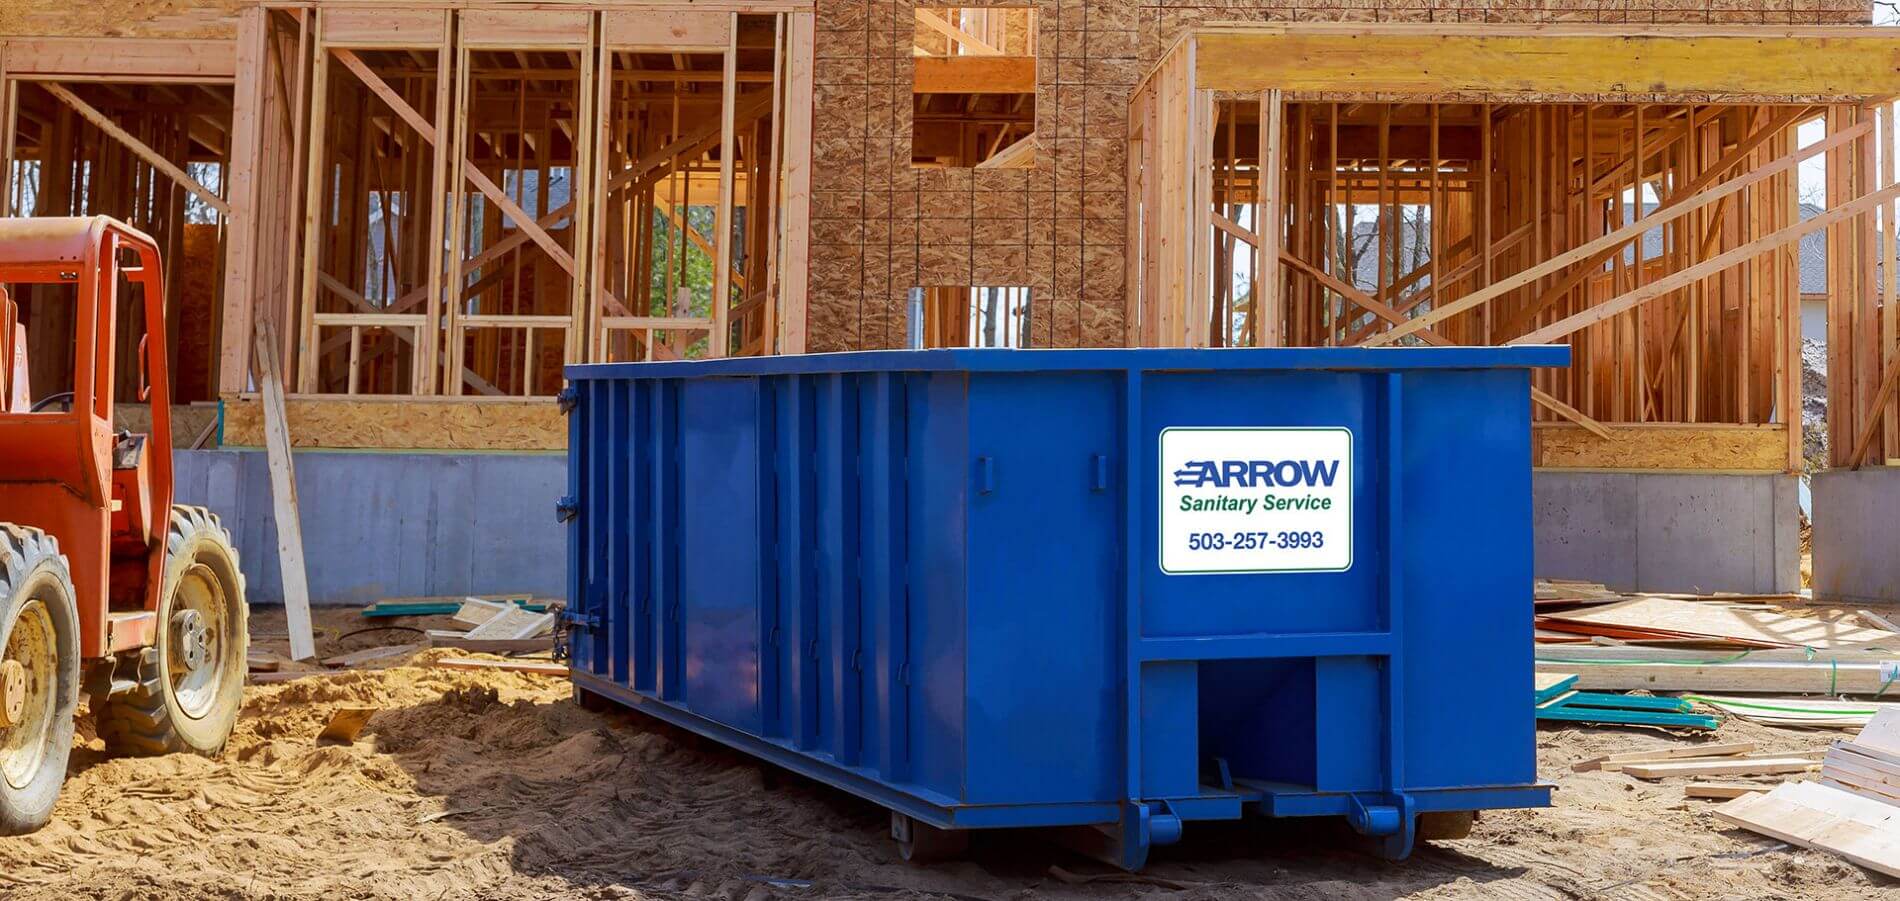 Arrow Sanitary Service roll off bin at construction site.